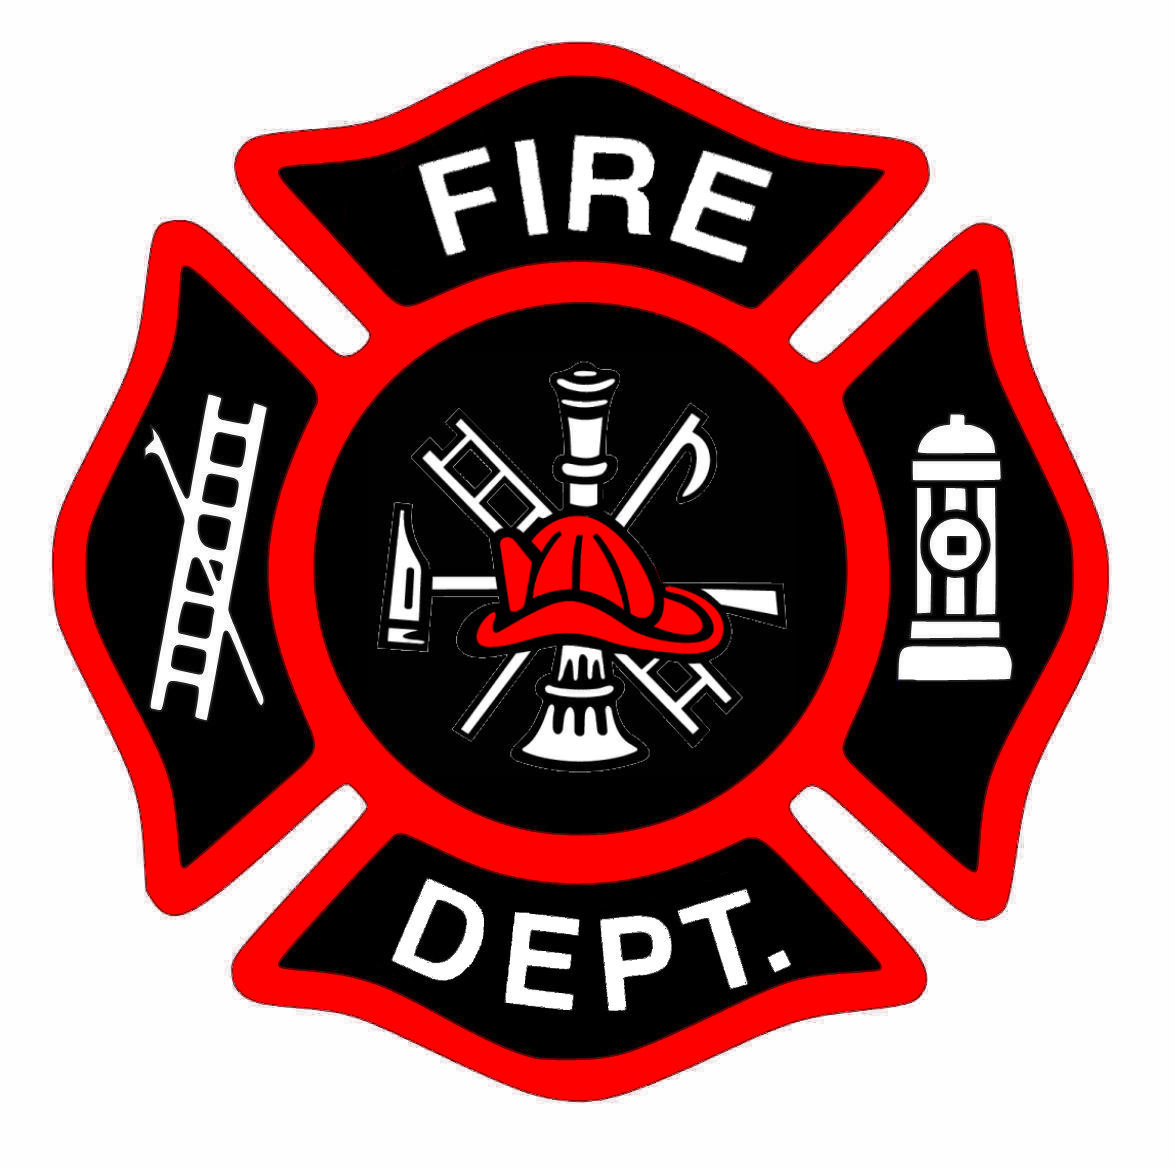 Fireman bage new red. Hero clipart badge